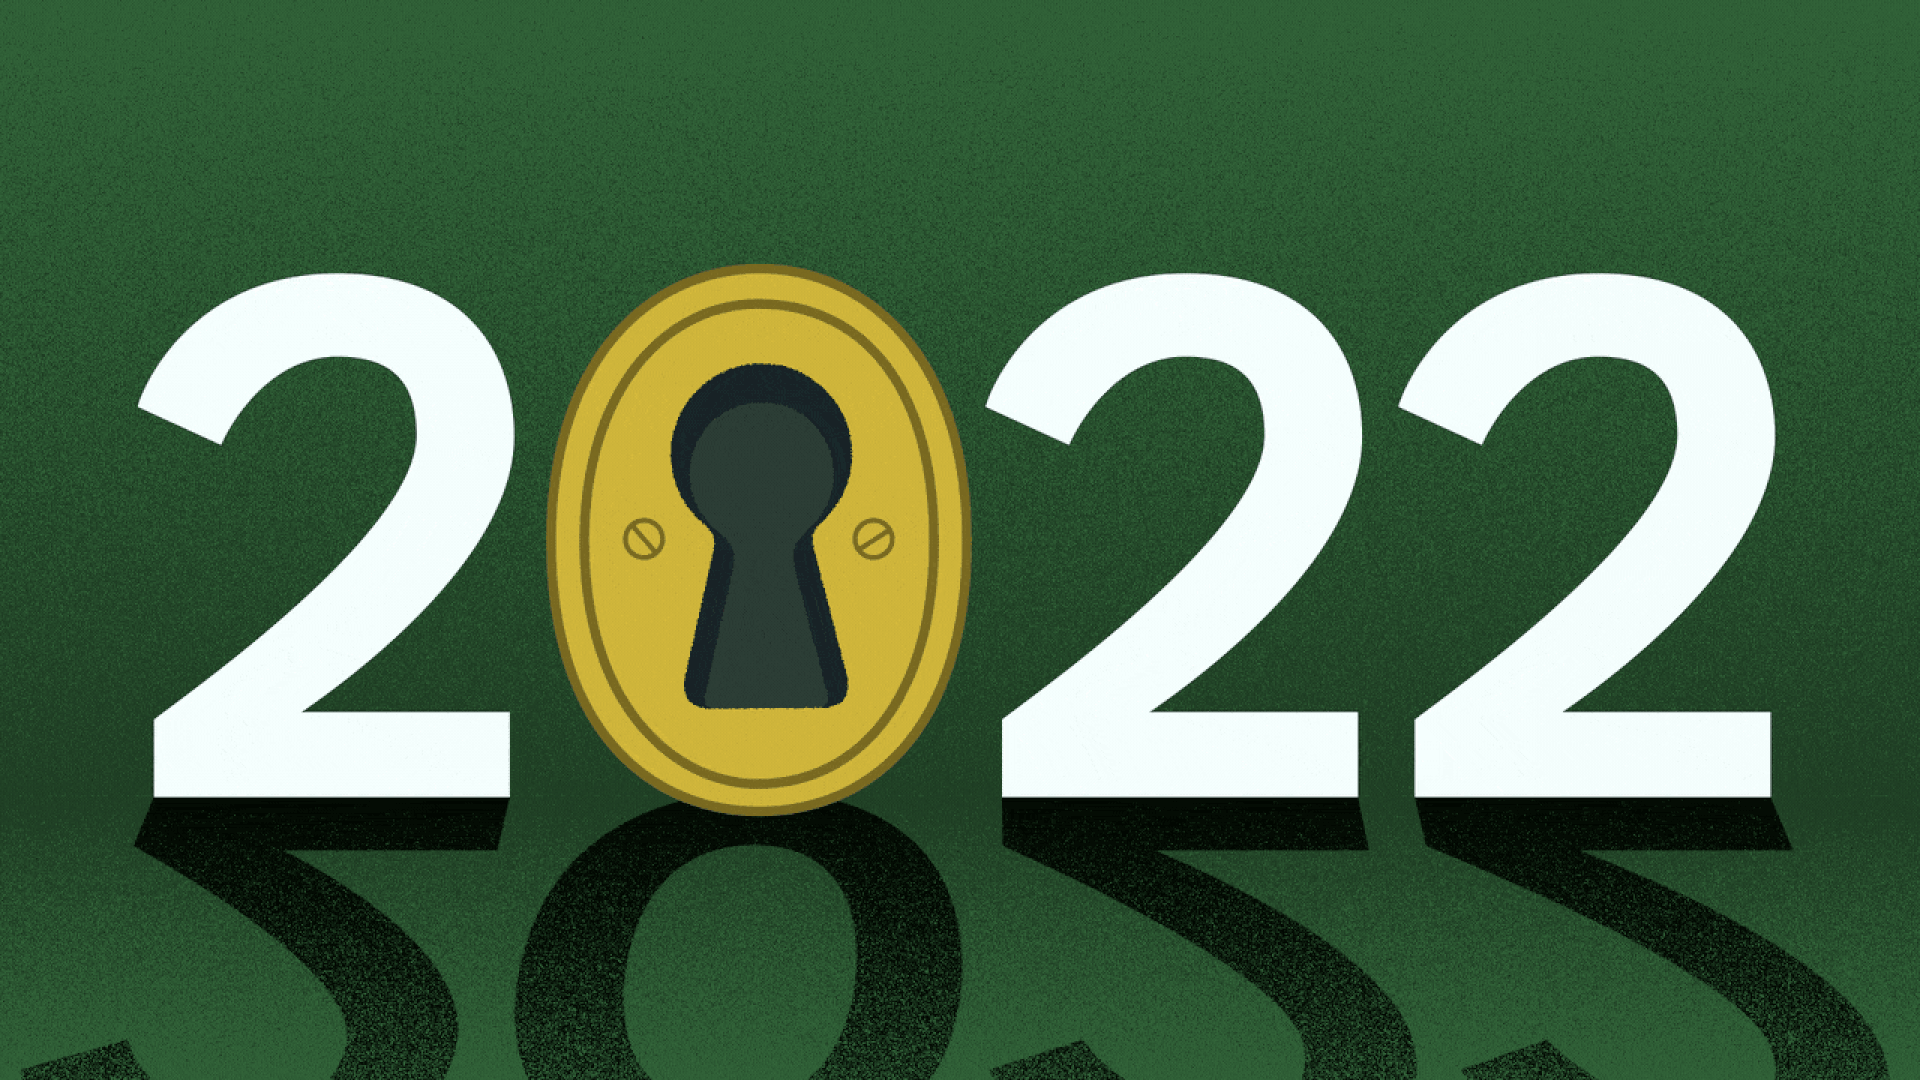 Illustration of the year 2022, with a keyhole for a zero, which zooms in so you can see through the keyhole to the year 2023.